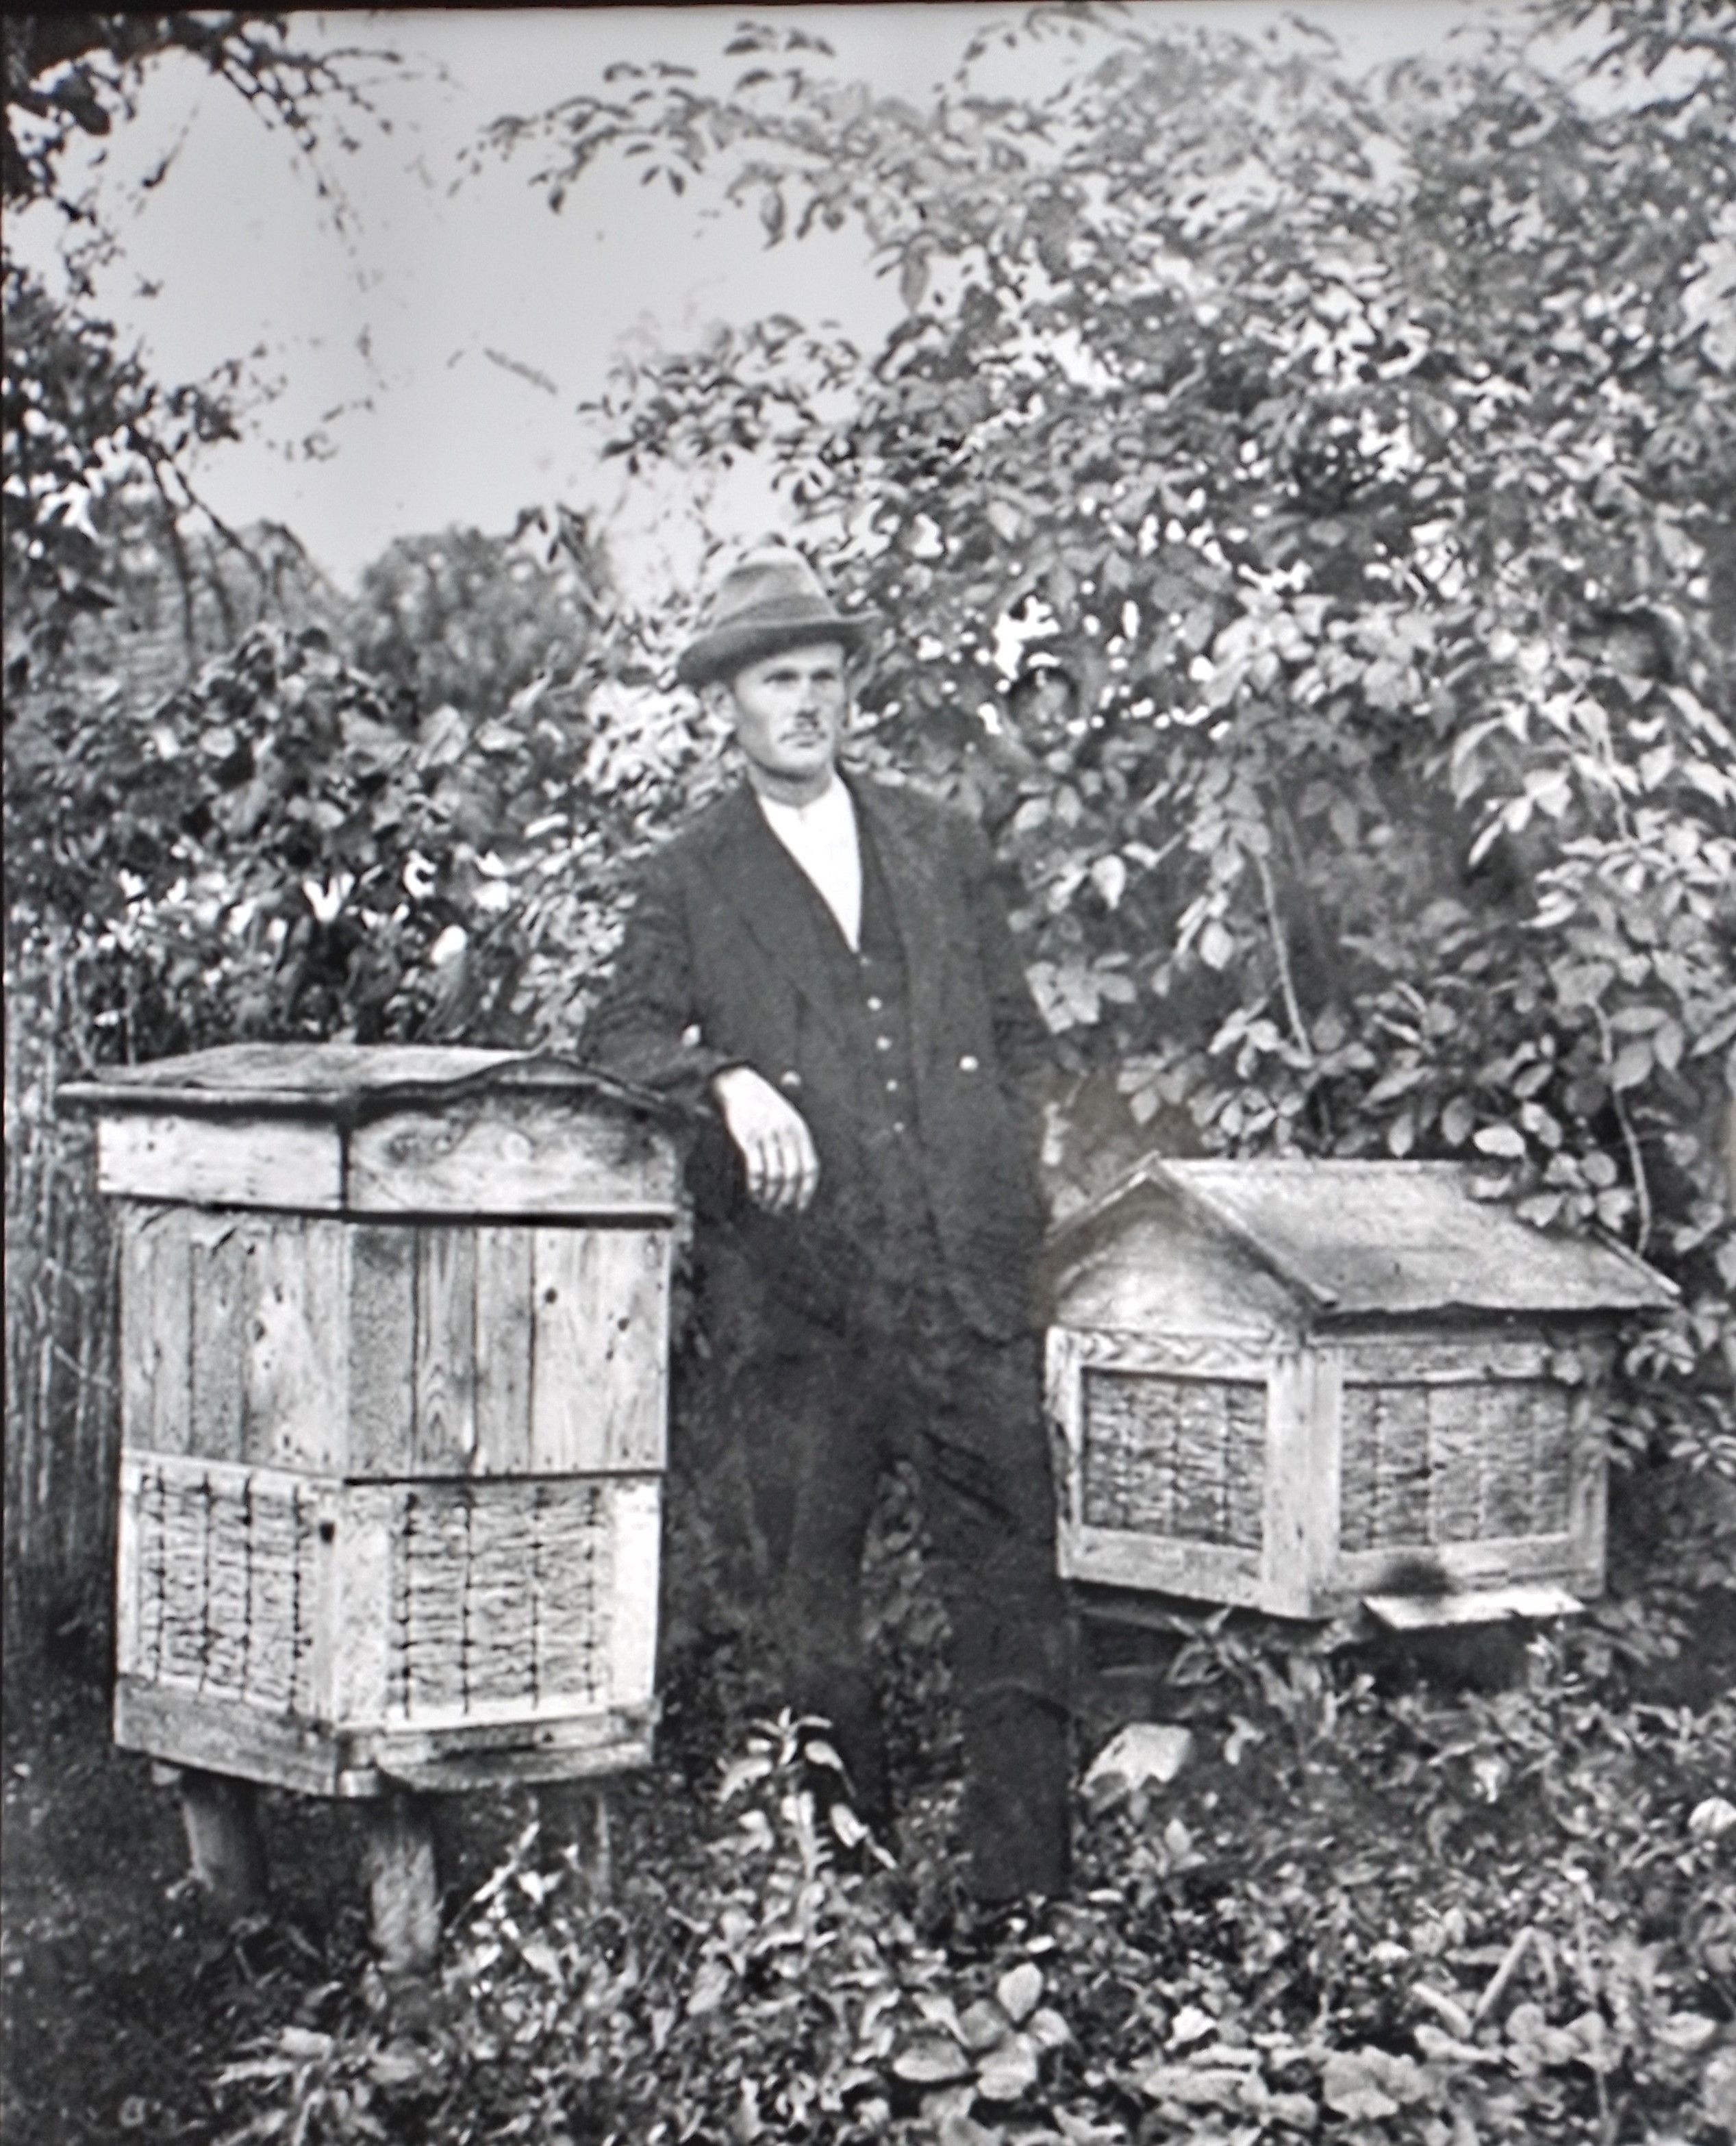 Jozef Ulma at his apiary sourced from the collections of relatives of the Ulma family and documented by Institute of National Remembrance in Poland  